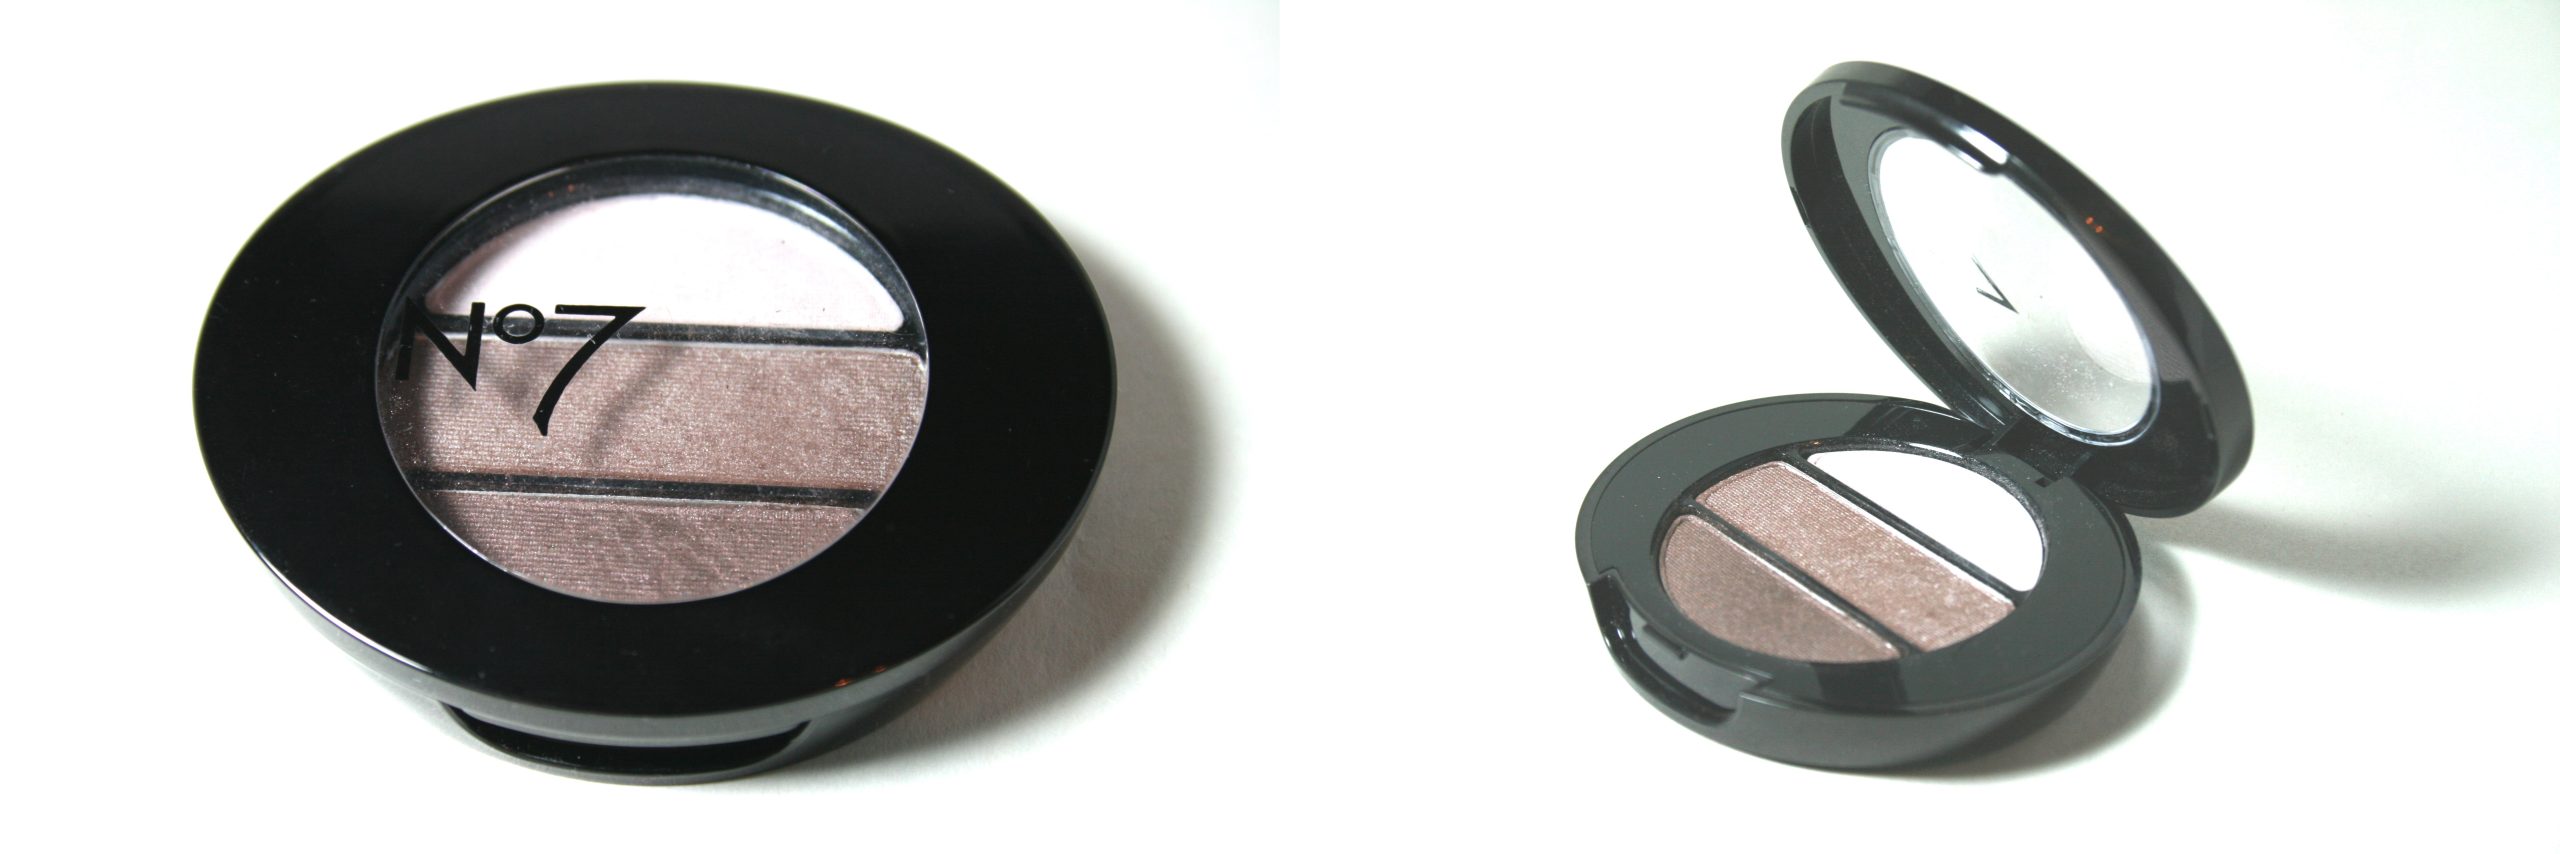 Boots No7 Stay Perfect Eyeshadow Trio in Good Earth